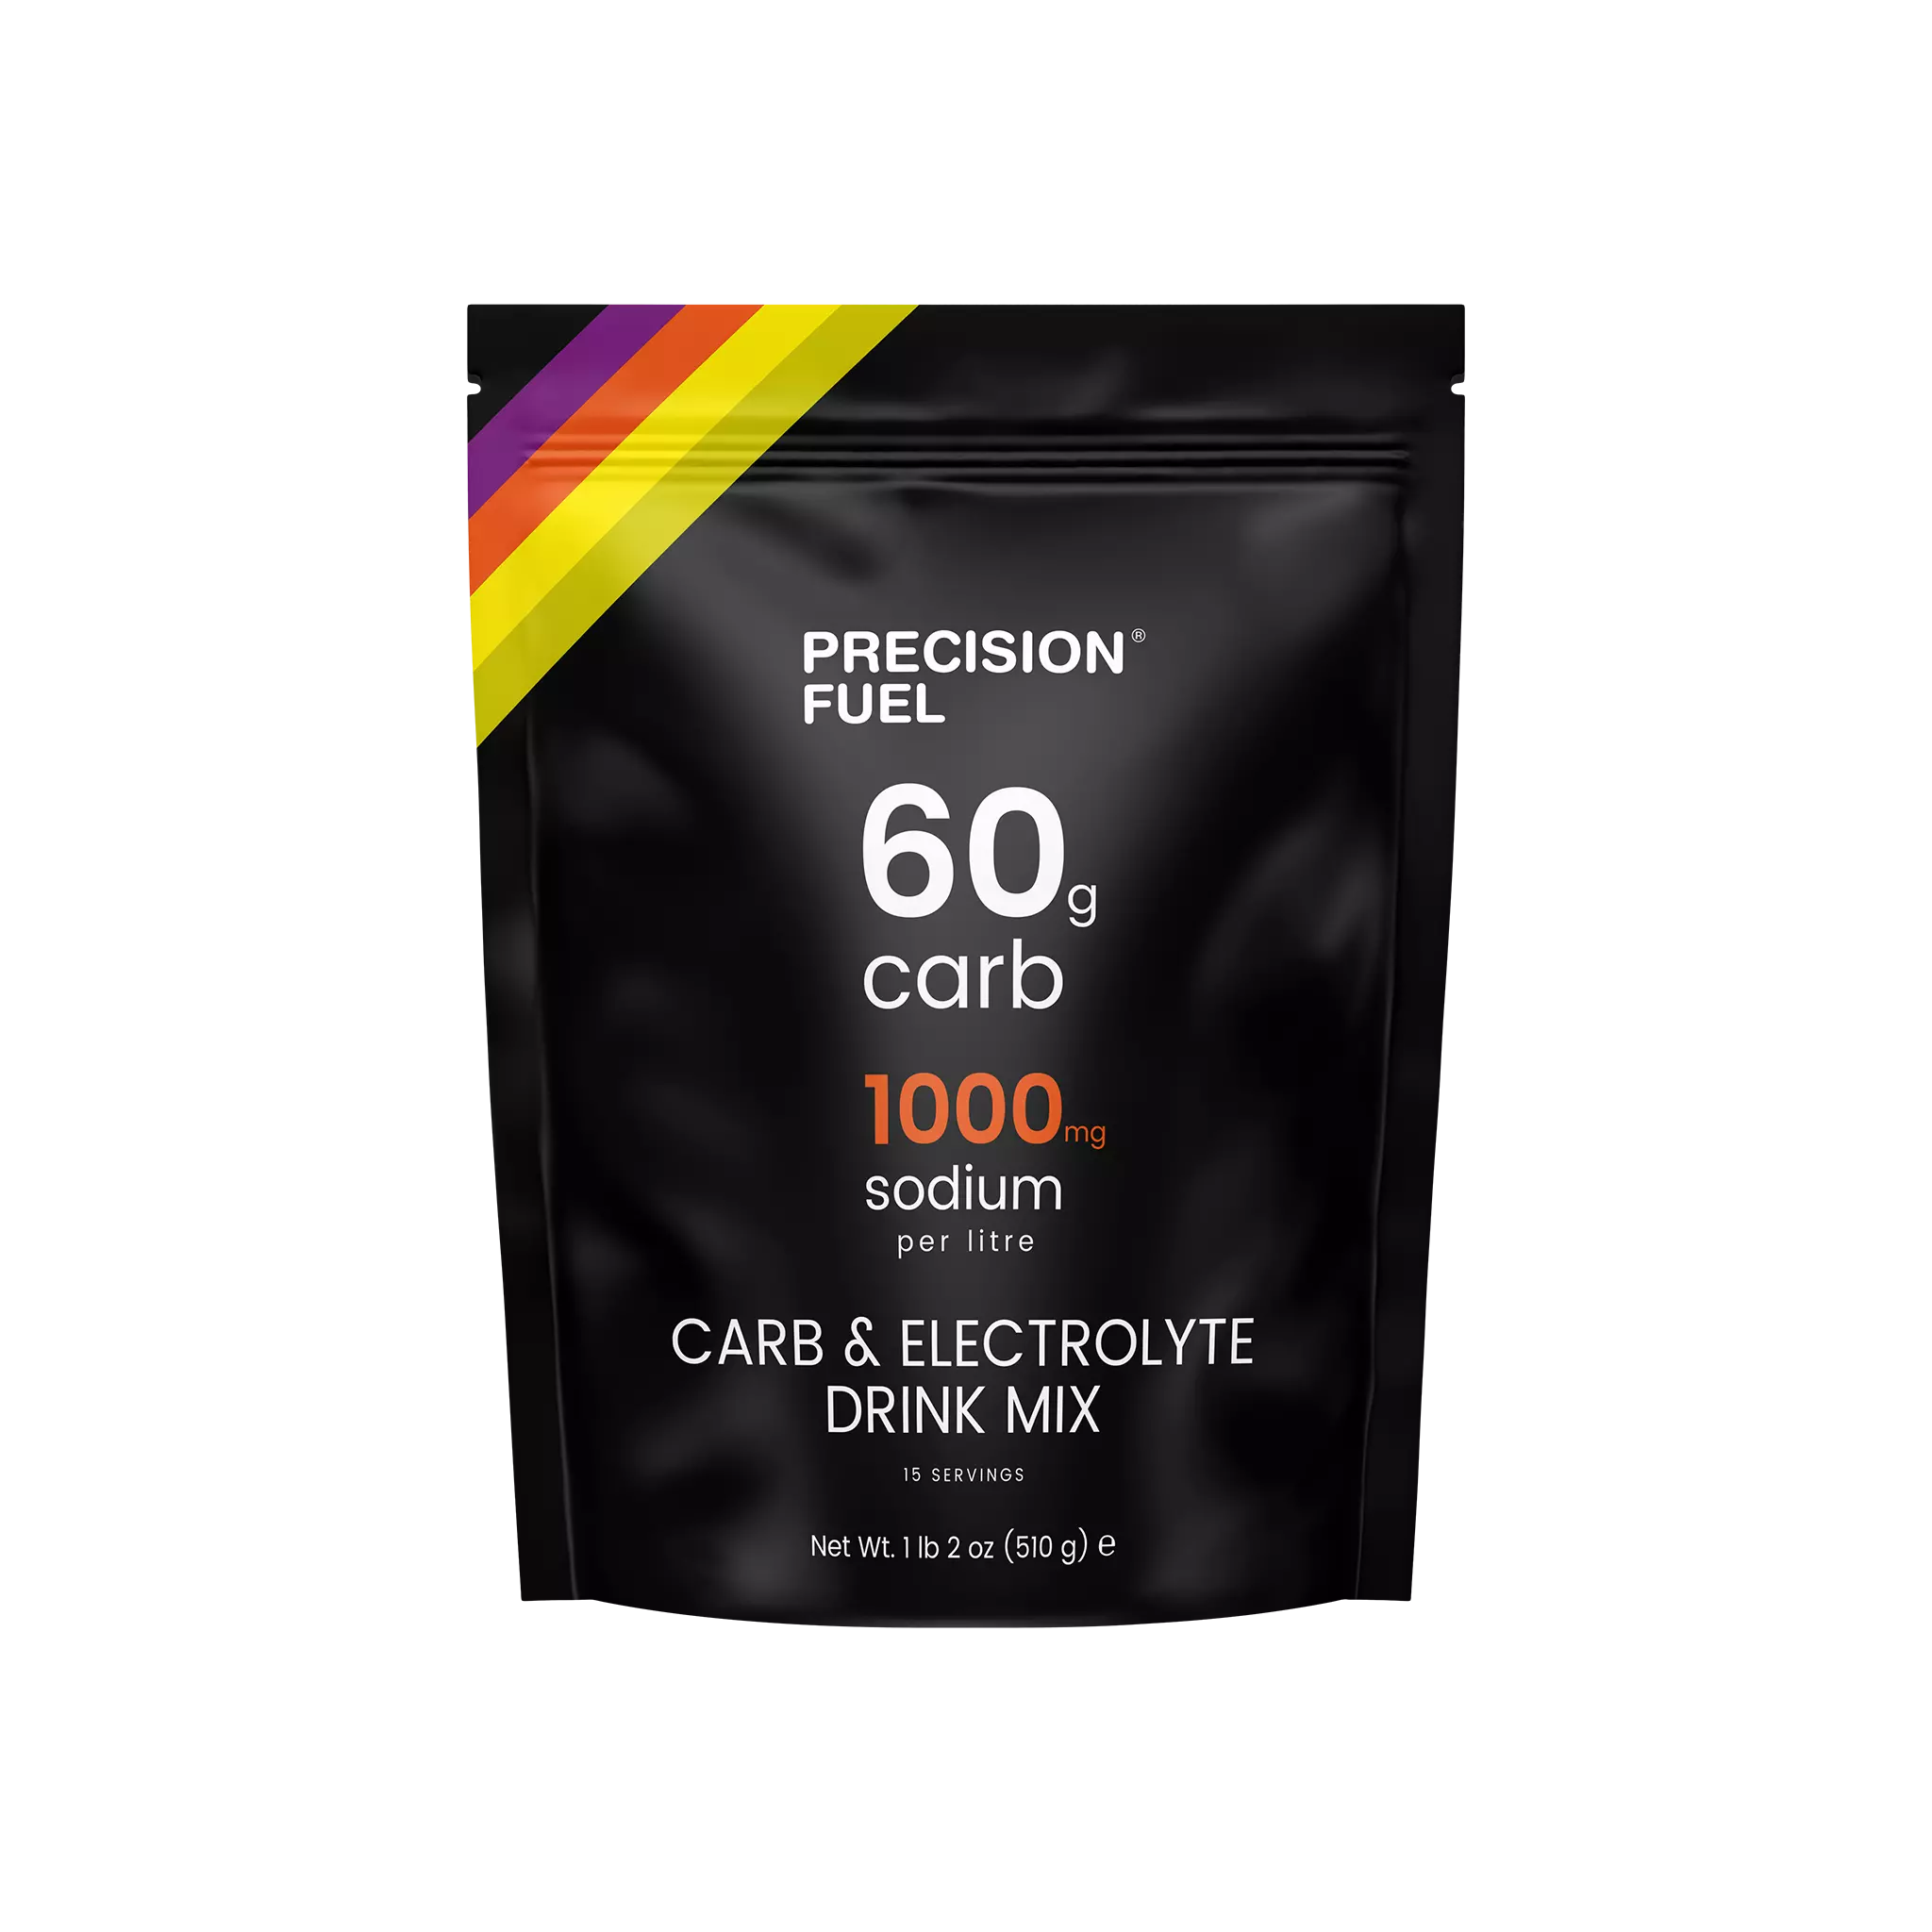 Carb & Electrolyte Drink Mix